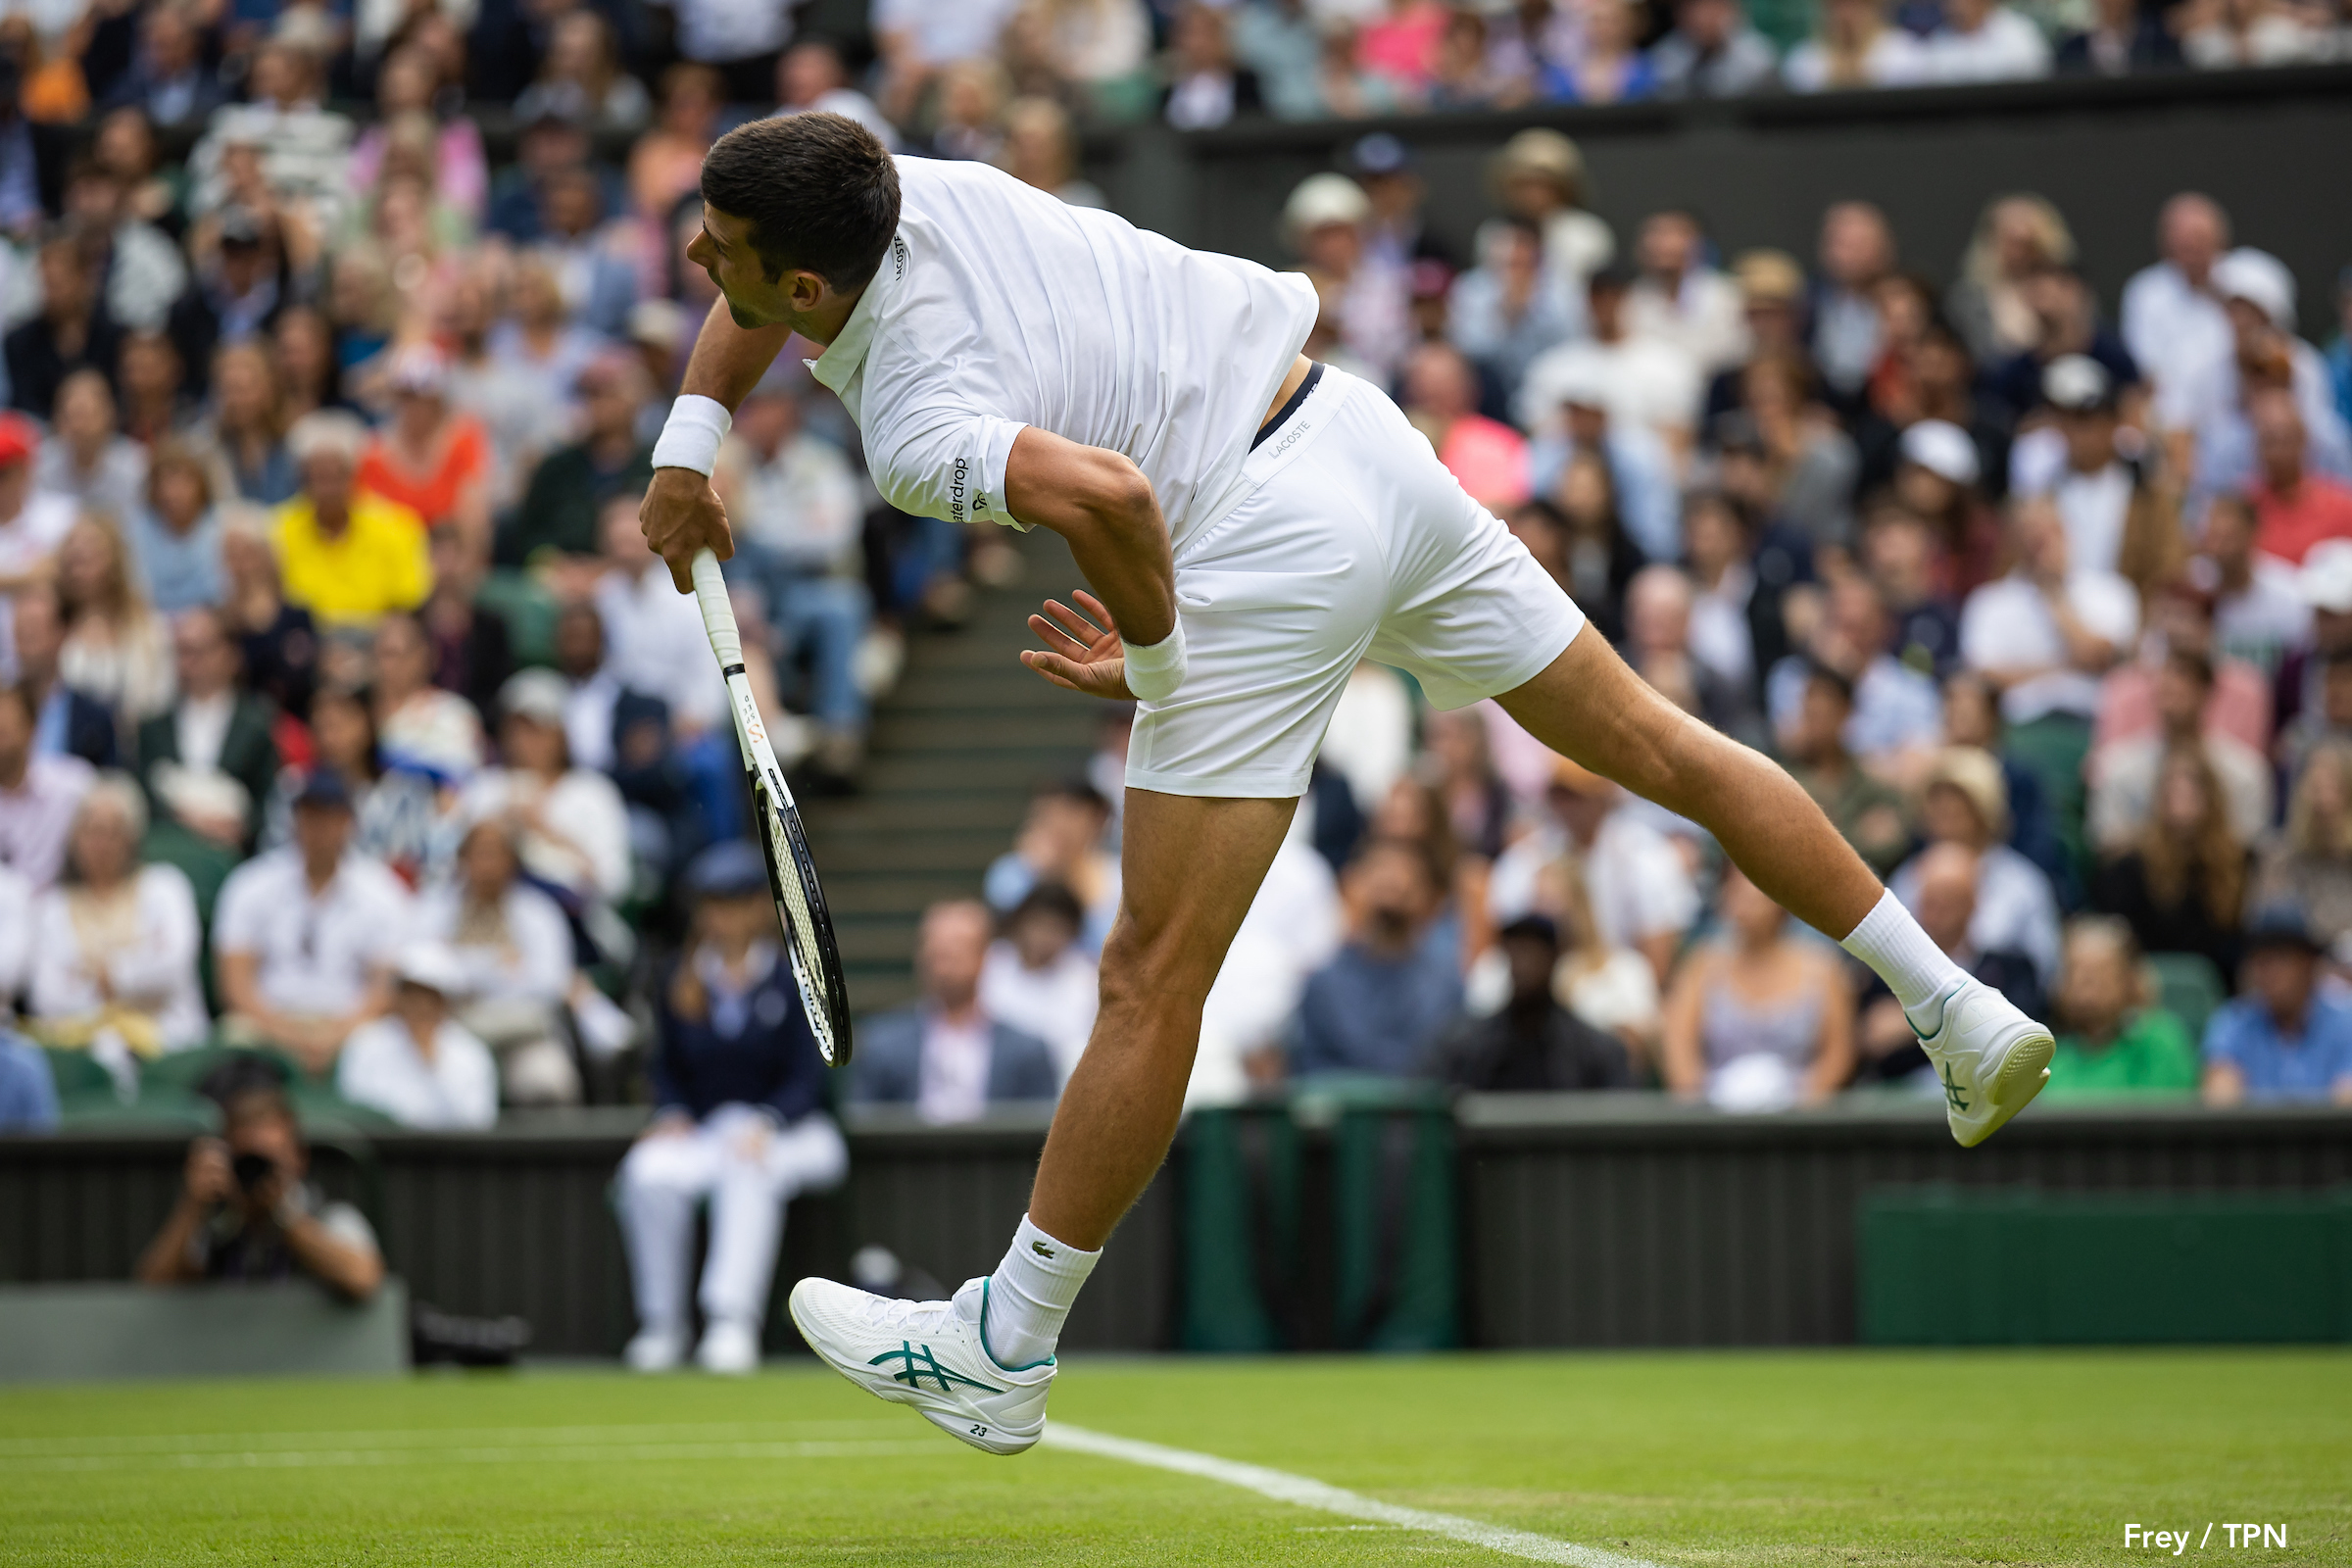 Wimbledon Serve Speed Is Trending In The Wrong Direction